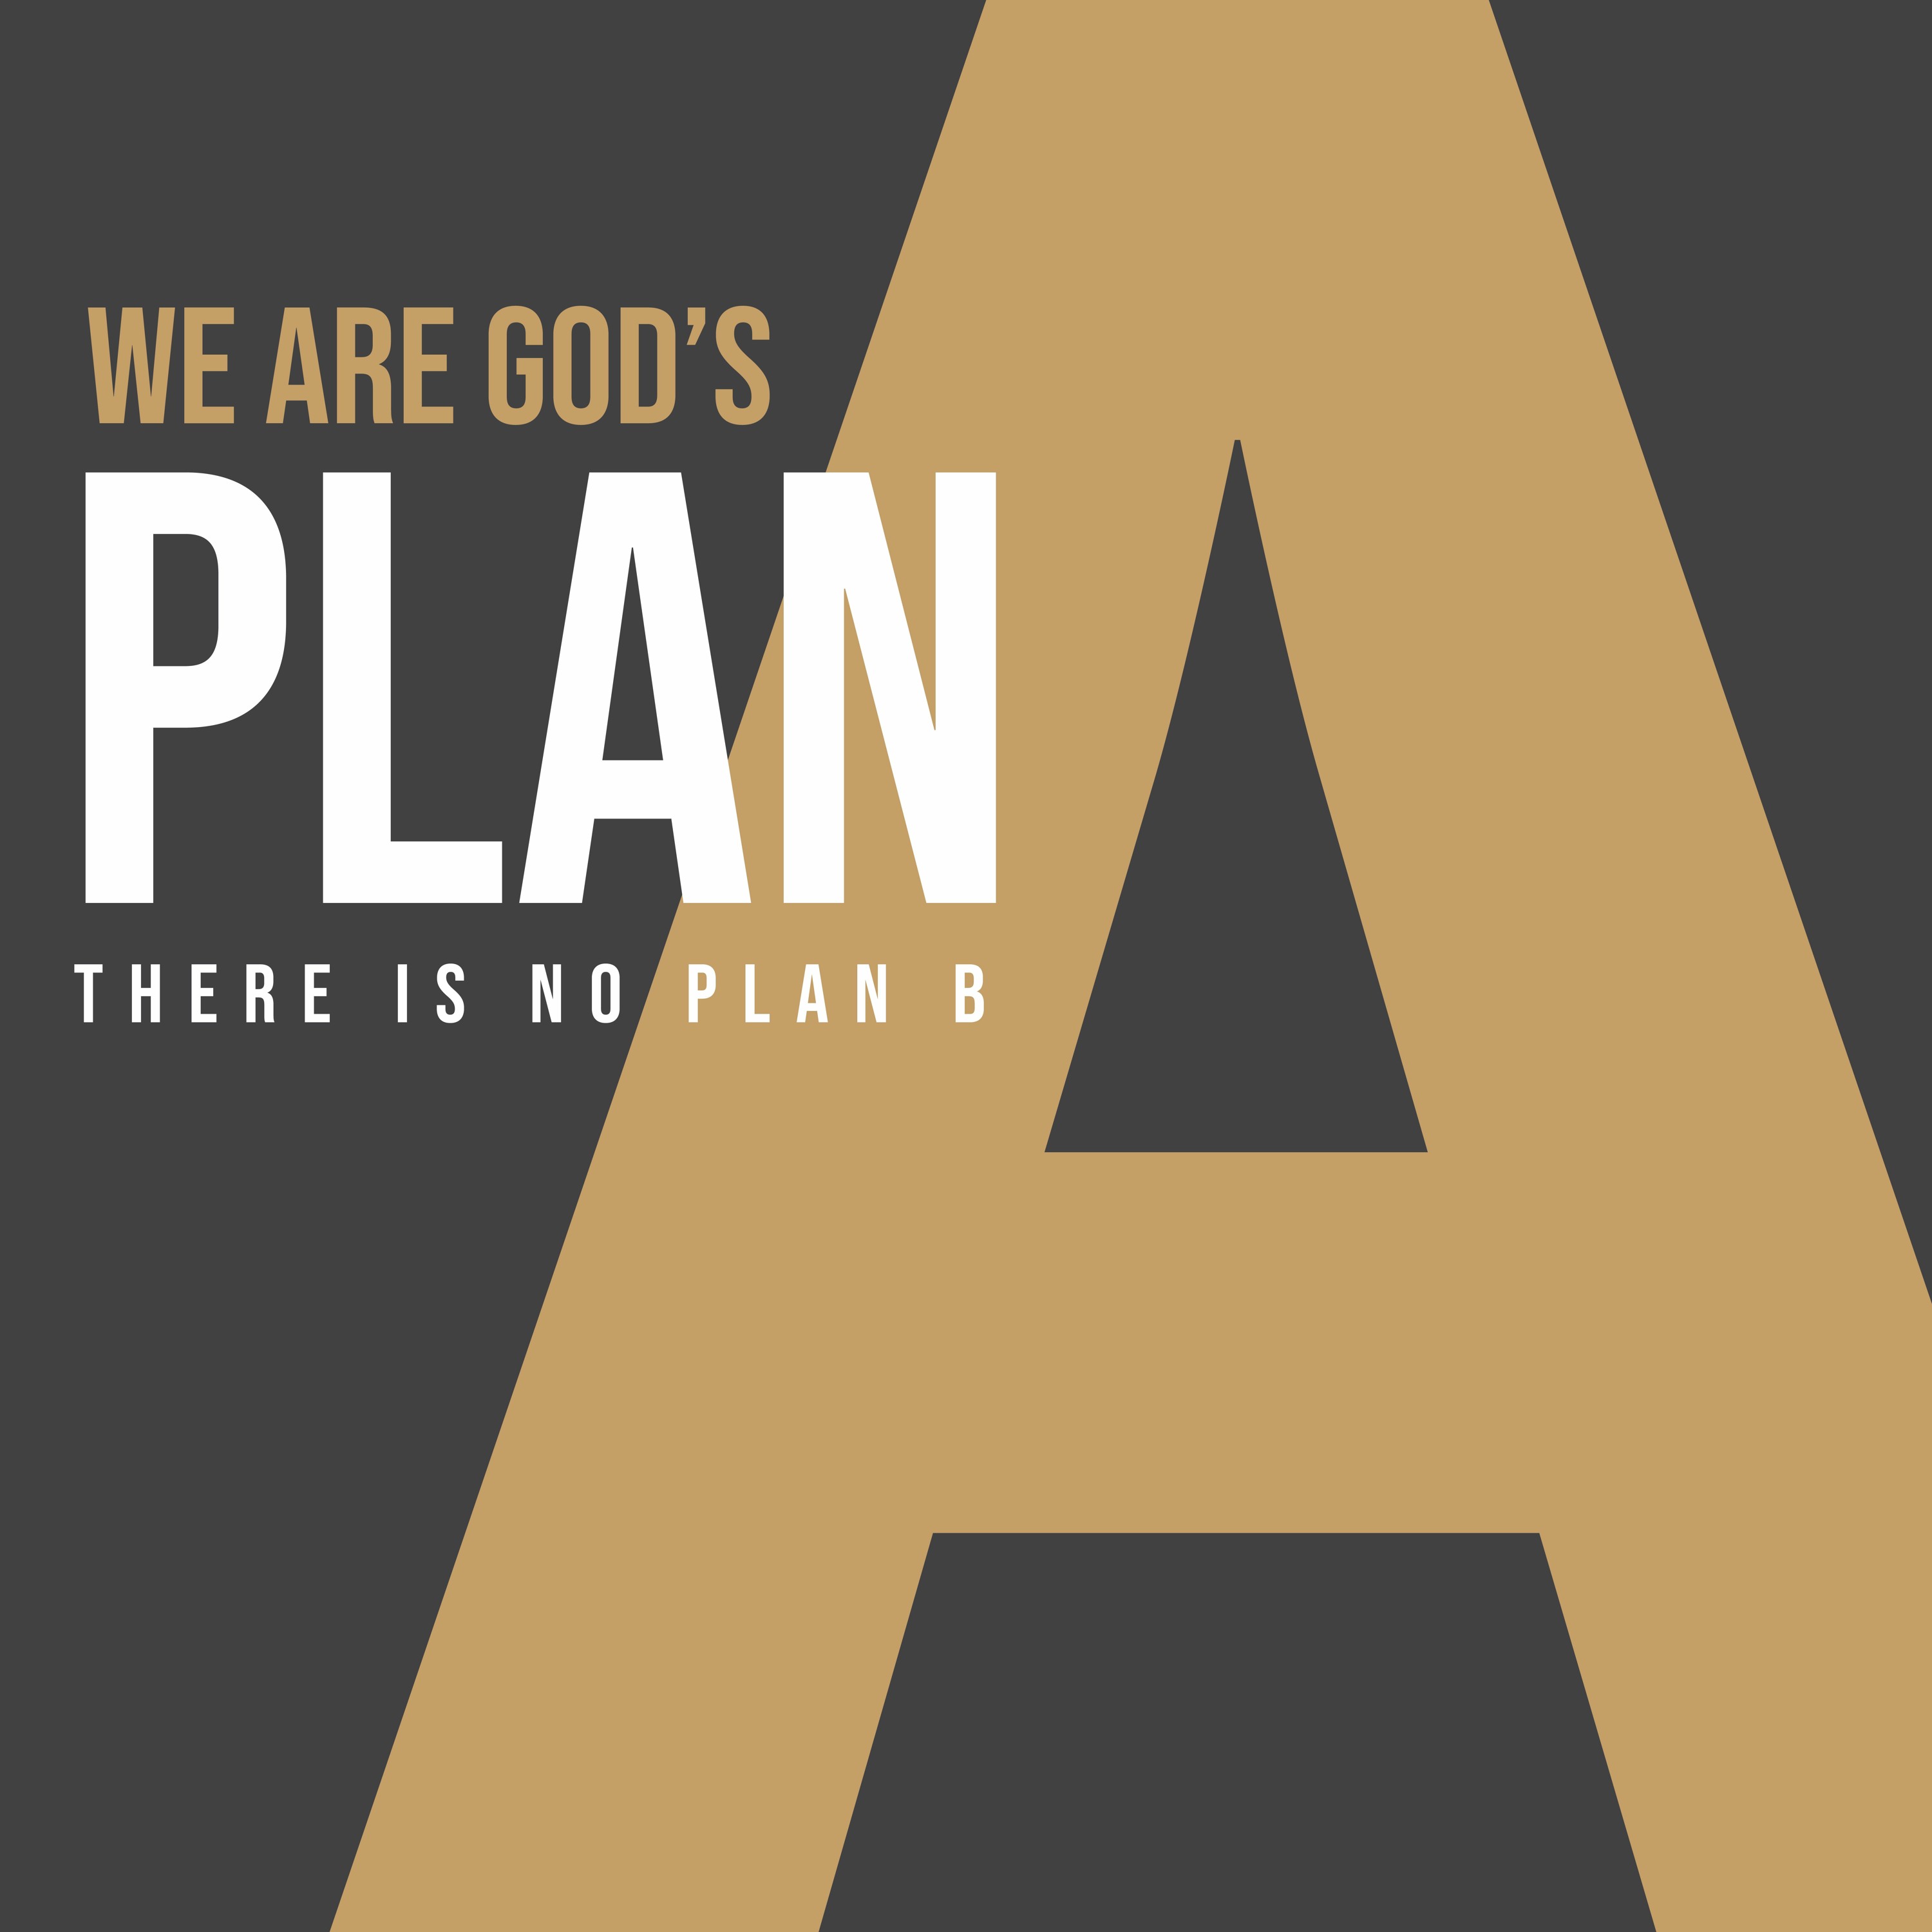 God’s Plan A To Change Society | We Are God’s Plan A | Ethan Magness